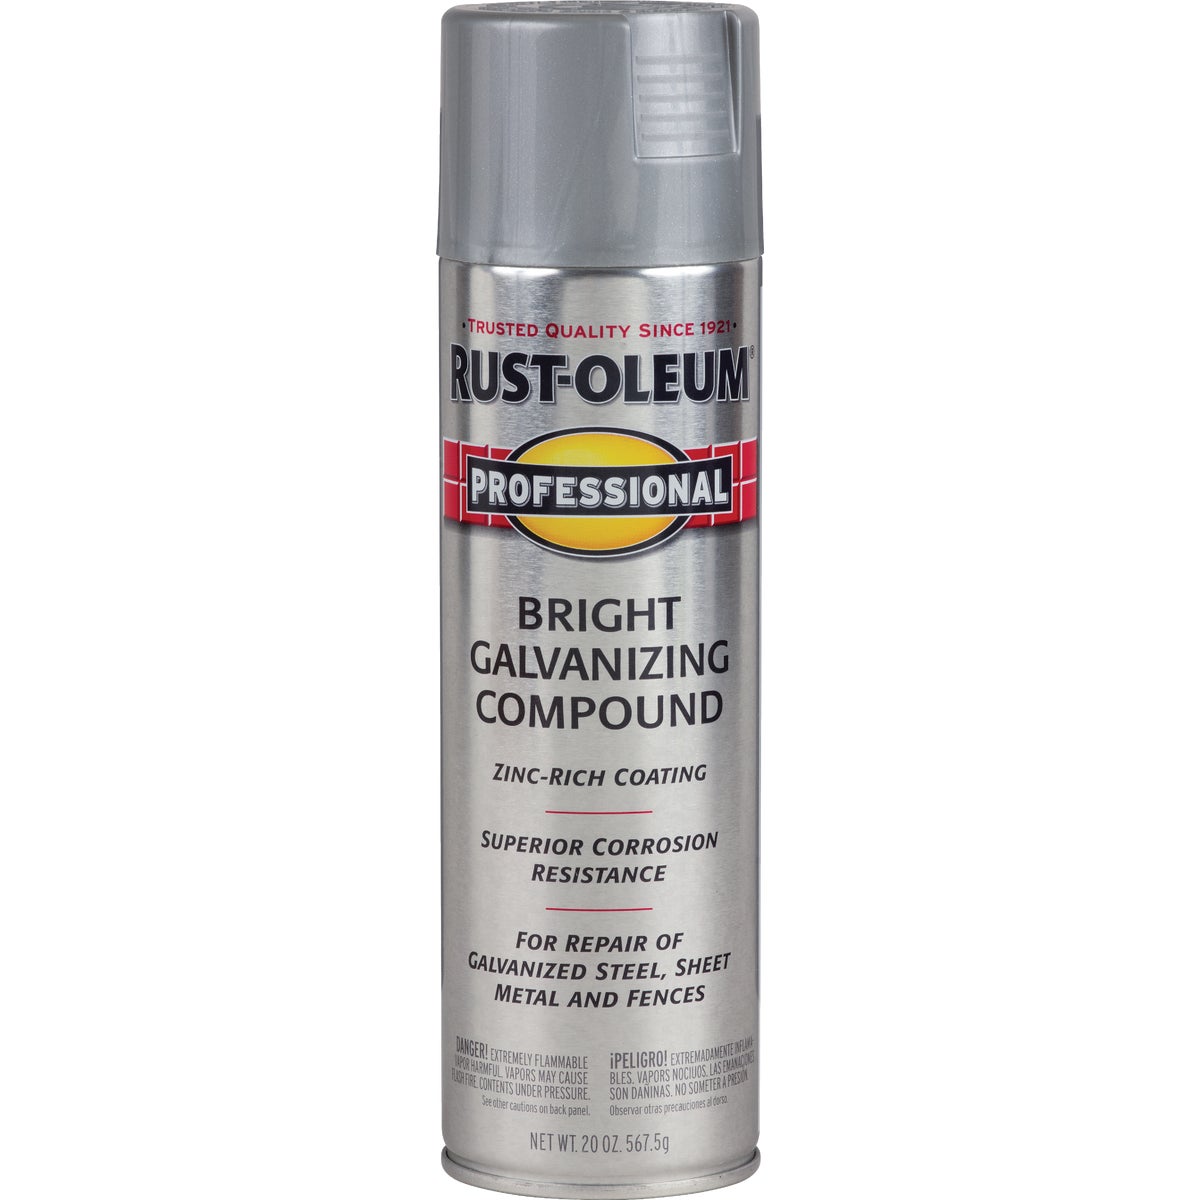 Item 783263, Rust-Oleum professional galvanizing compound spray contains a high loading 